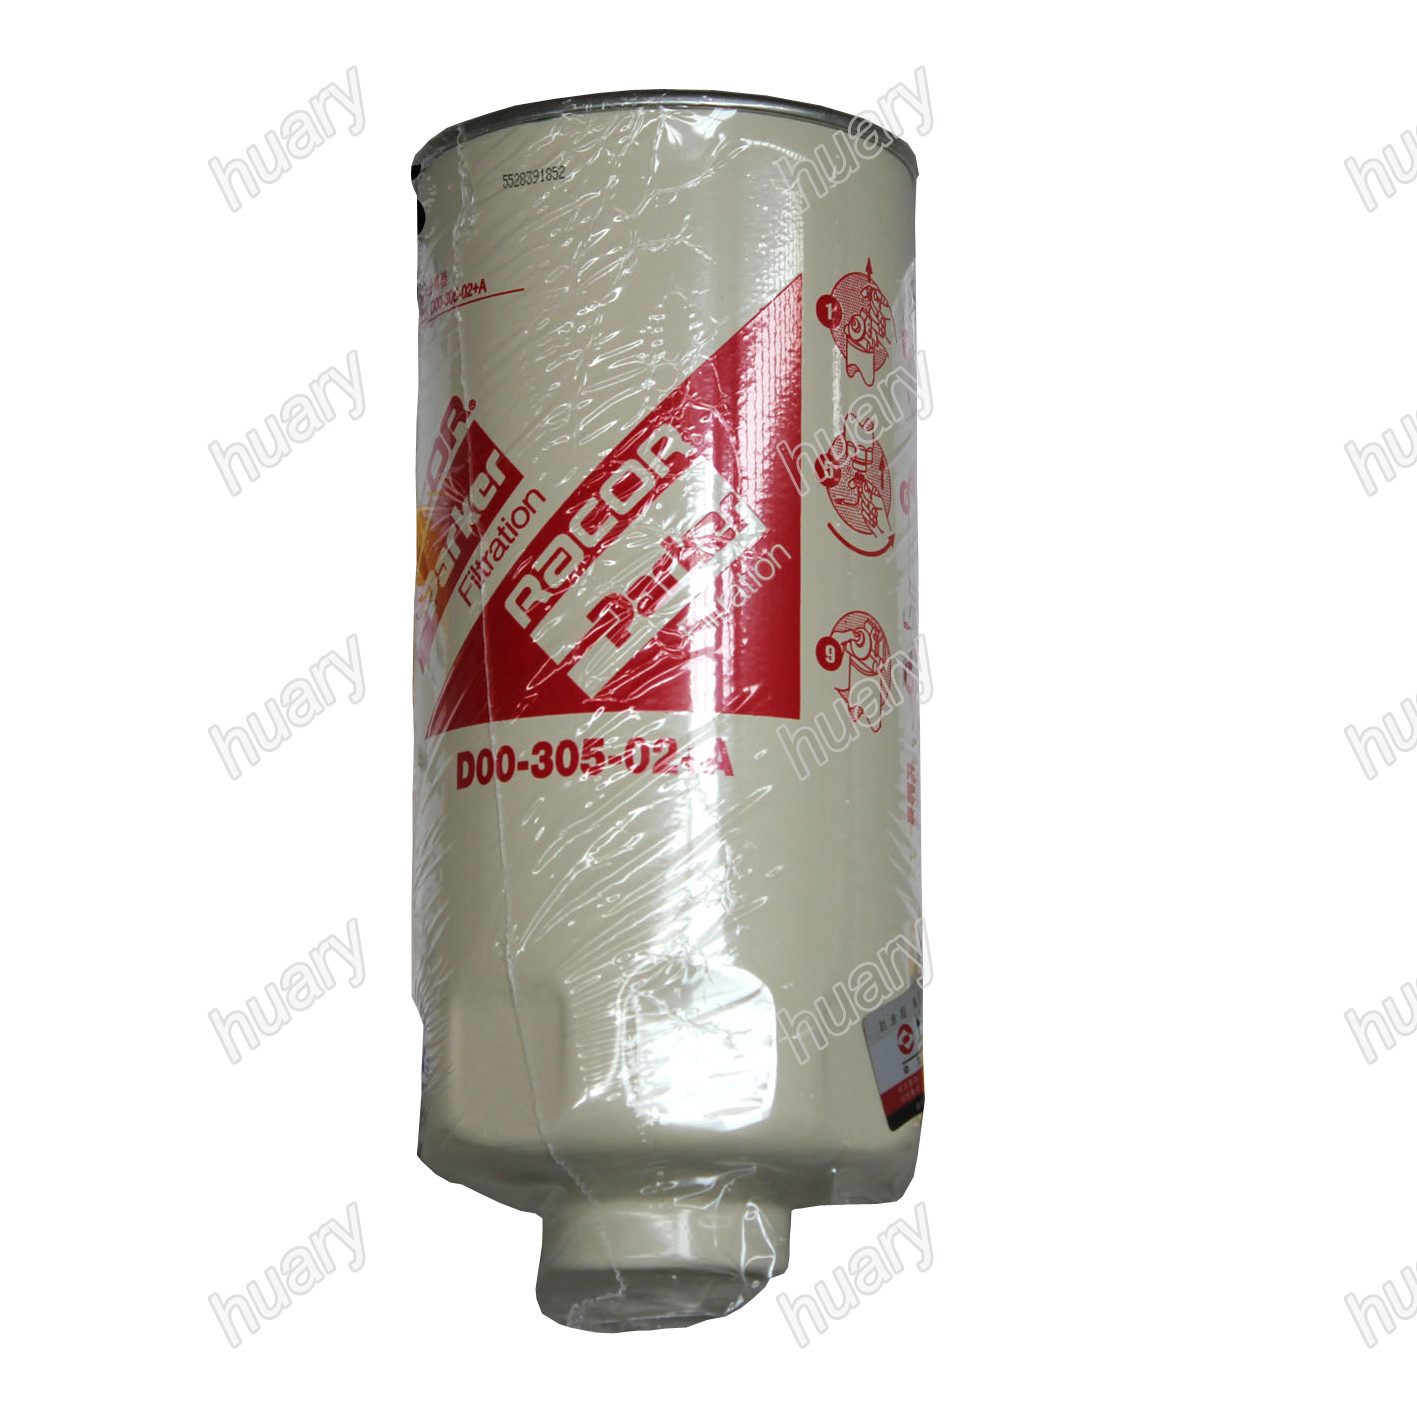 XCMG Truck Crane Spare Parts,800105465 D00-305-02+A Oil-water separator filter